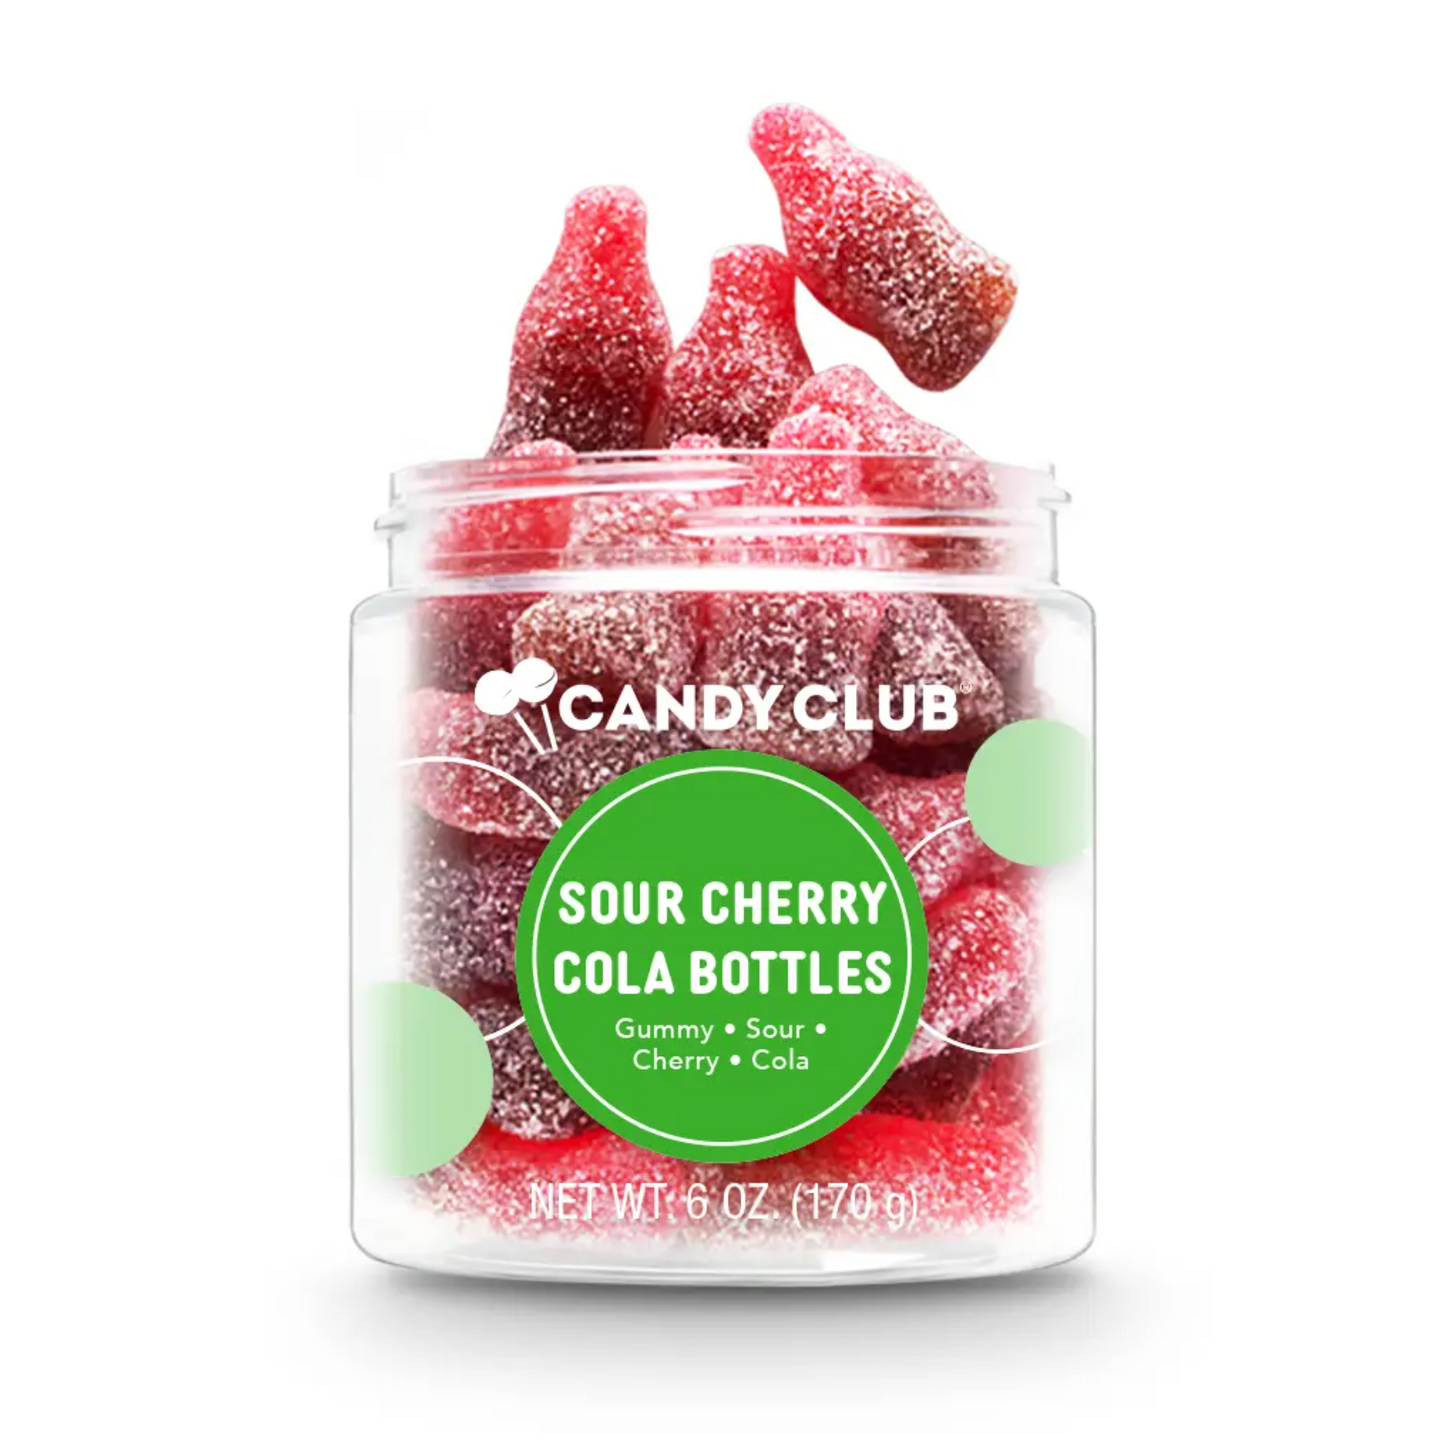 Sour Cherry Cola Bottle Candies by Candy Club